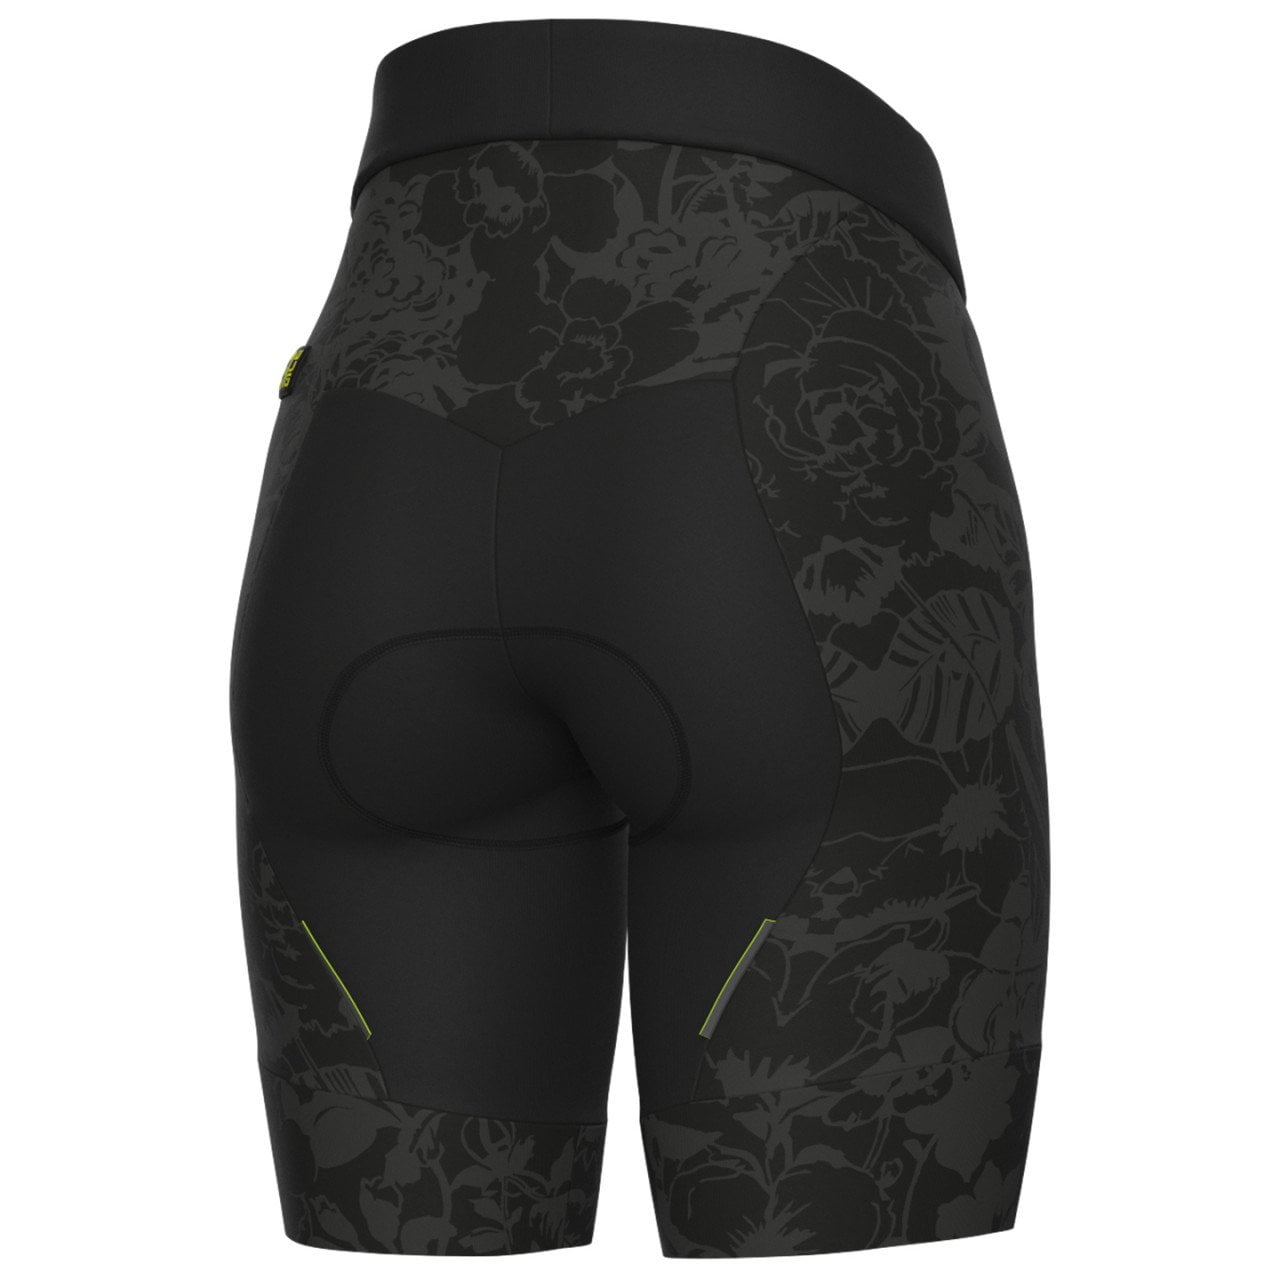 Nadine Women's Cycling Tights